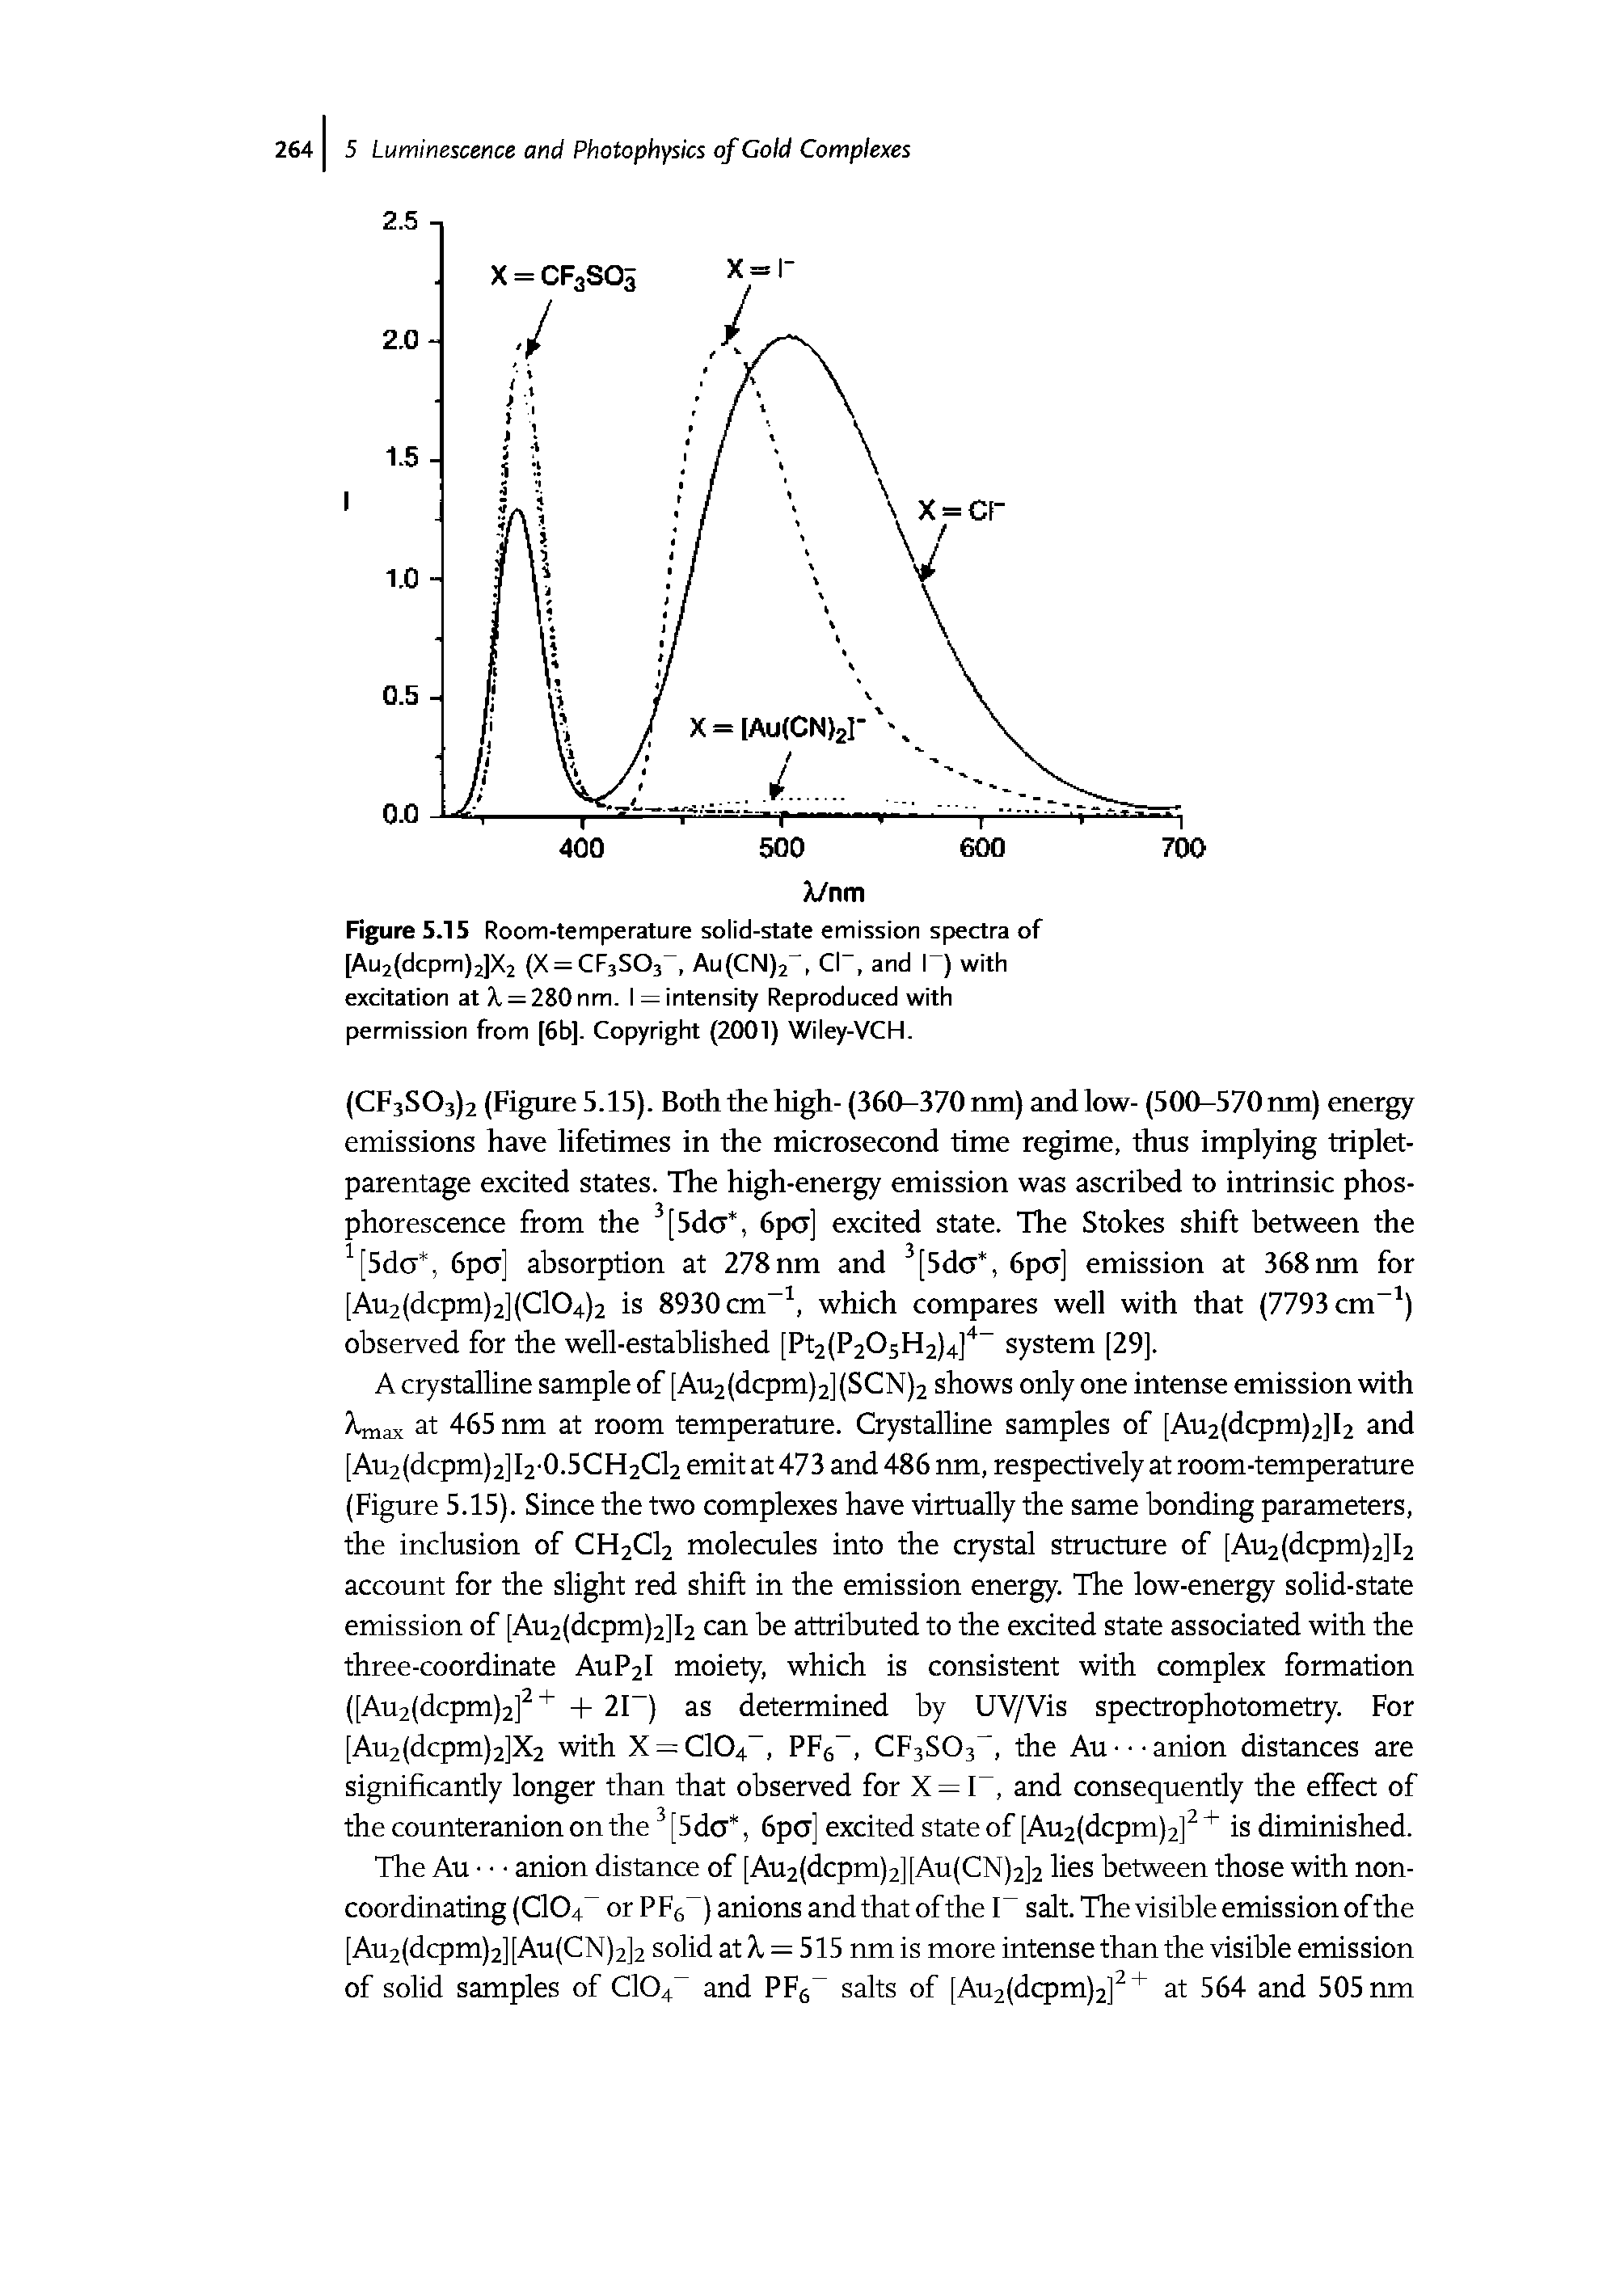 Figure 5.15 Room-temperature solid-state emission spectra of [Au2(dcpm)2]X2 (X = CF3S03, Au(CN)2, CI , and T) with excitation at X = 280nm. I = intensity Reproduced with permission from [6b]. Copyright (2001) Wiley-VCH.